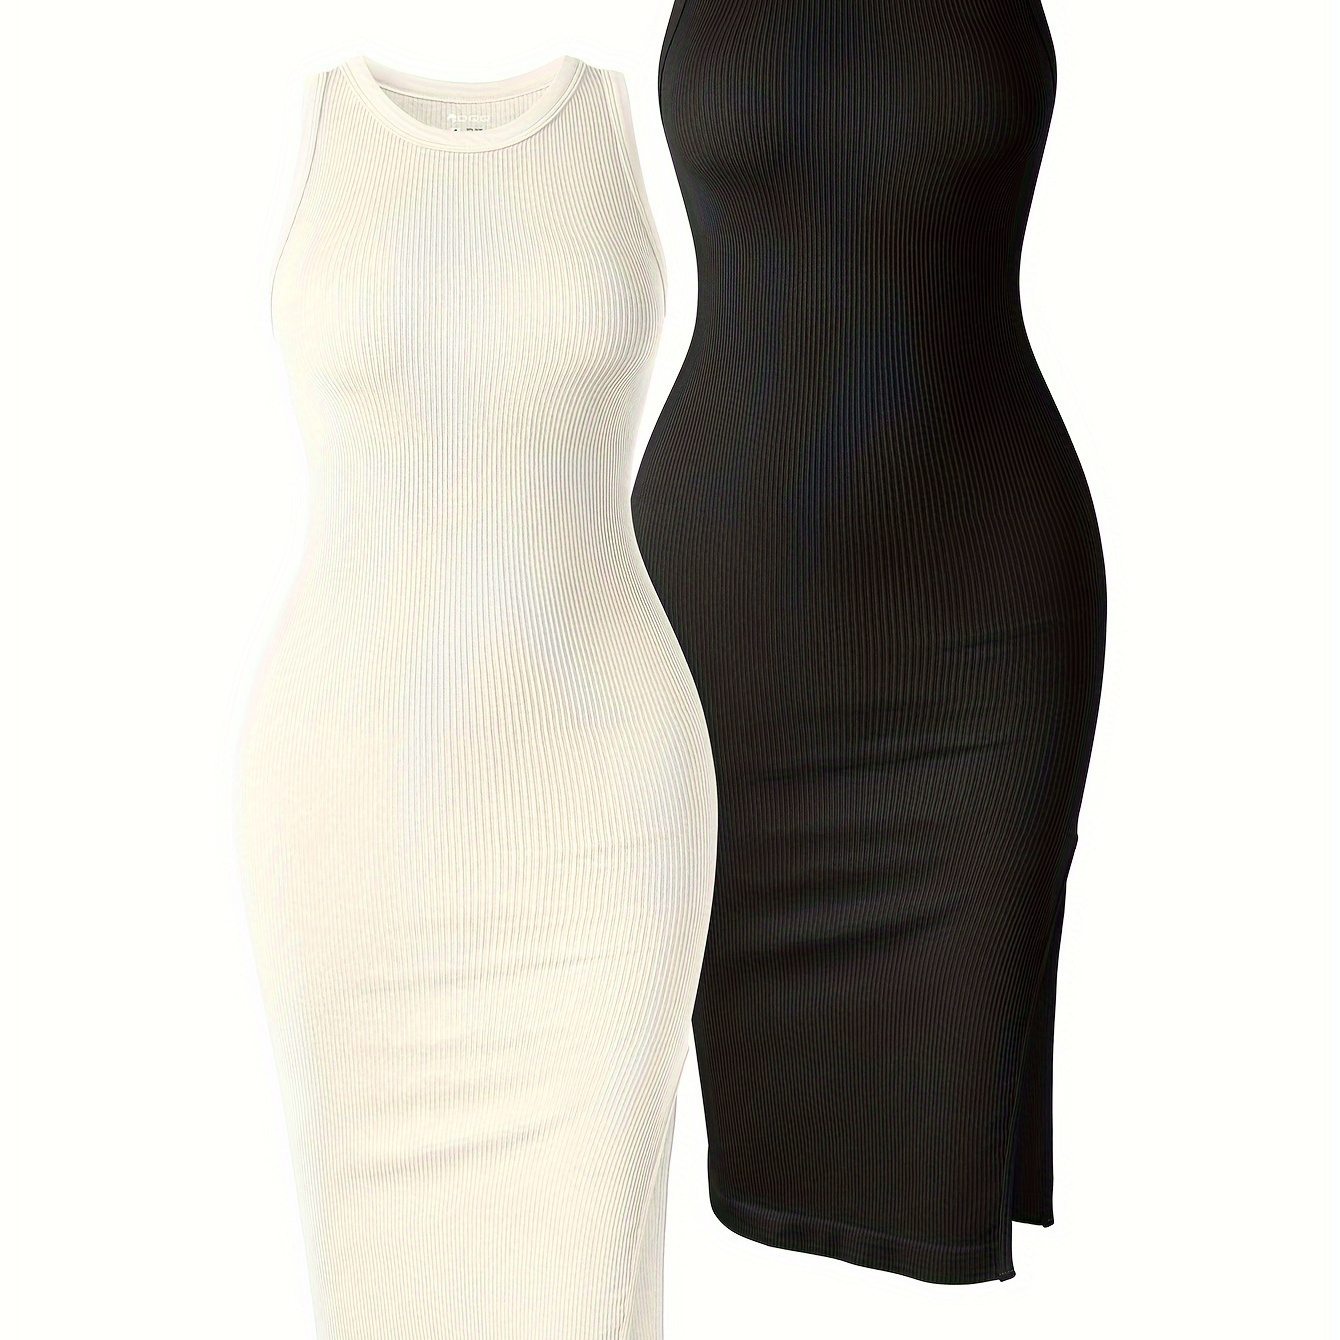 

2-pack Ribbed Tank Dresses, Sleeveless Bodycon Midi Dress, Casual Summer Stretchy Dress, Women's Activewear